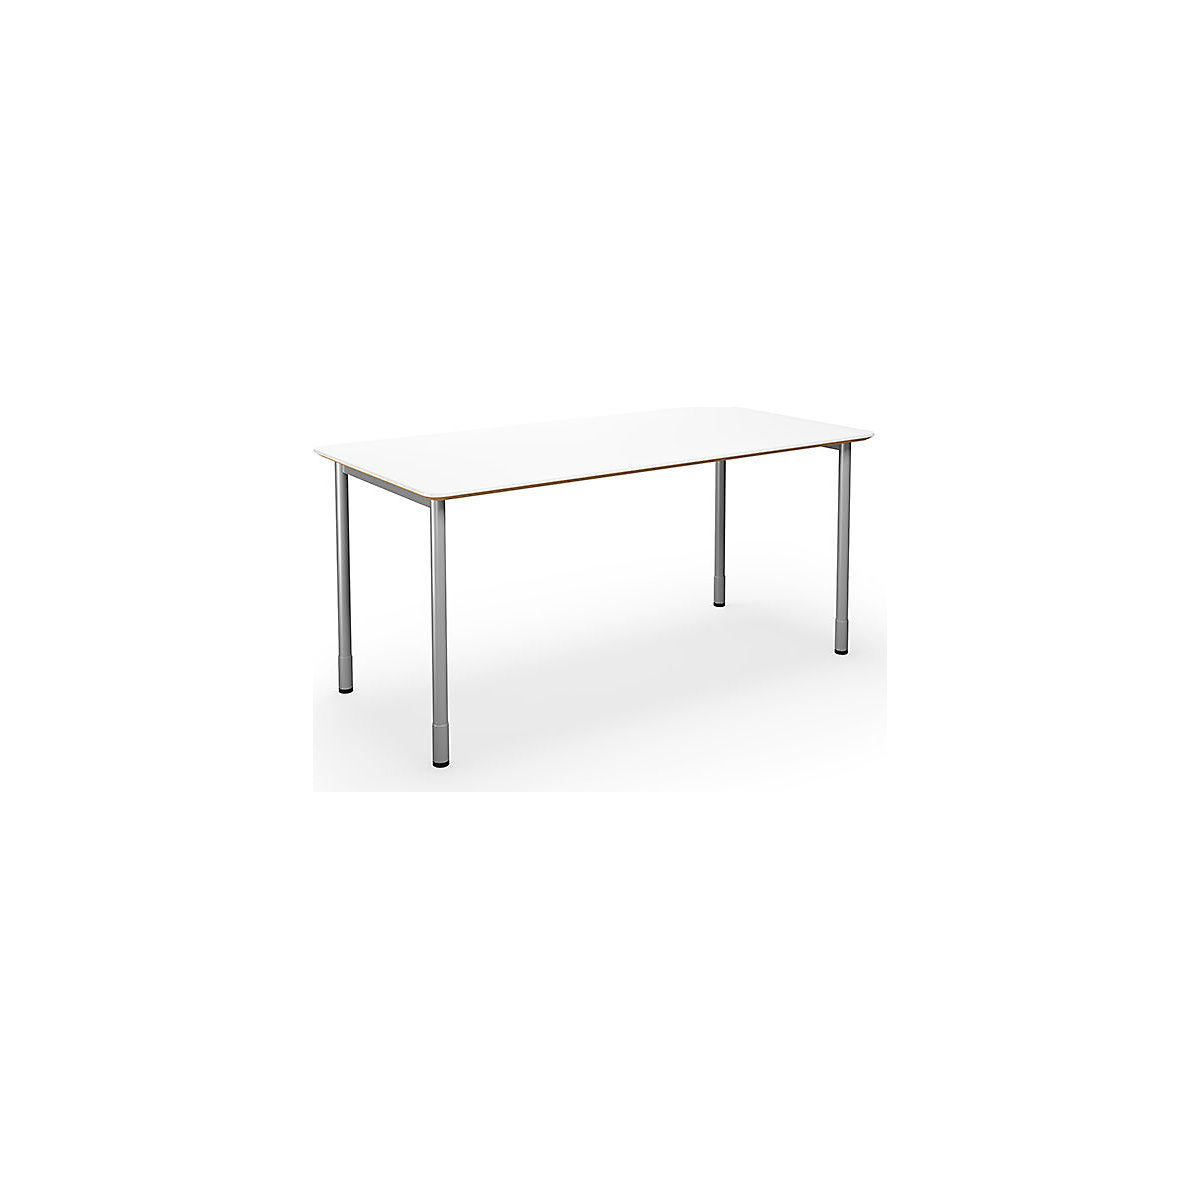 DUO-C Trend multi-purpose desk, straight tabletop, rounded corners, WxD 1400 x 800 mm, white, silver-2